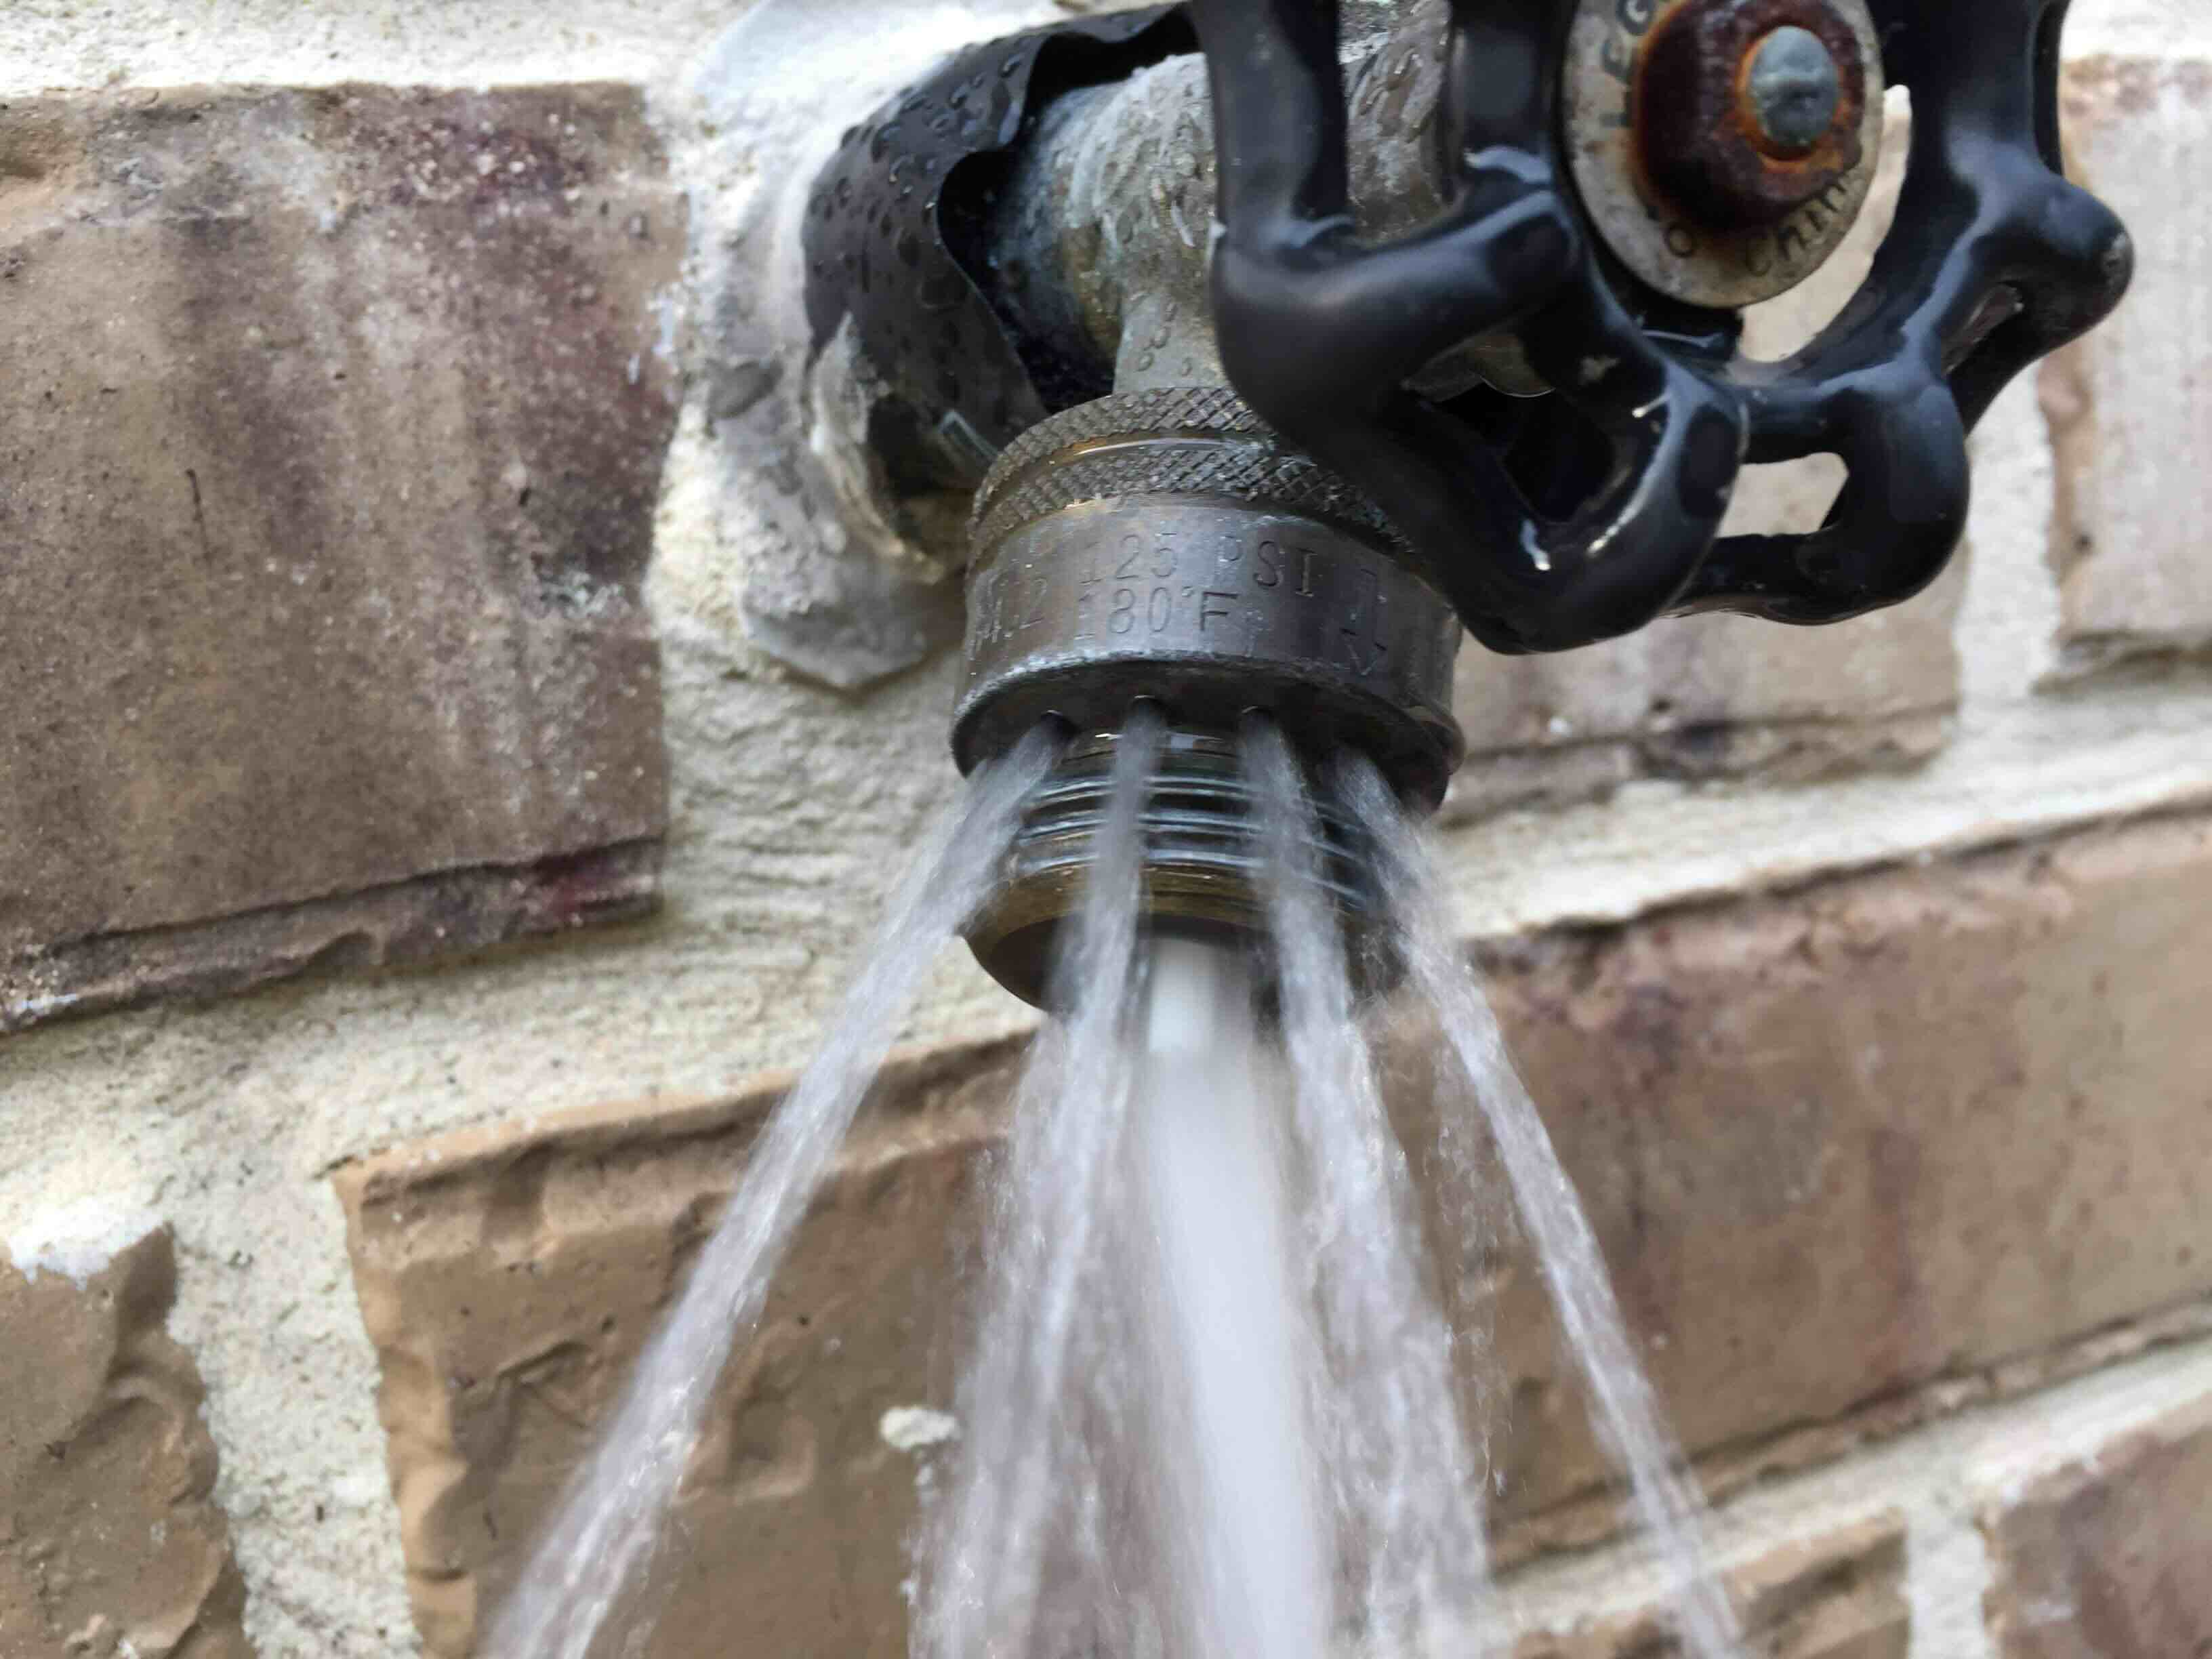 How To Fix Anti-Siphon Valve On Outdoor Faucet